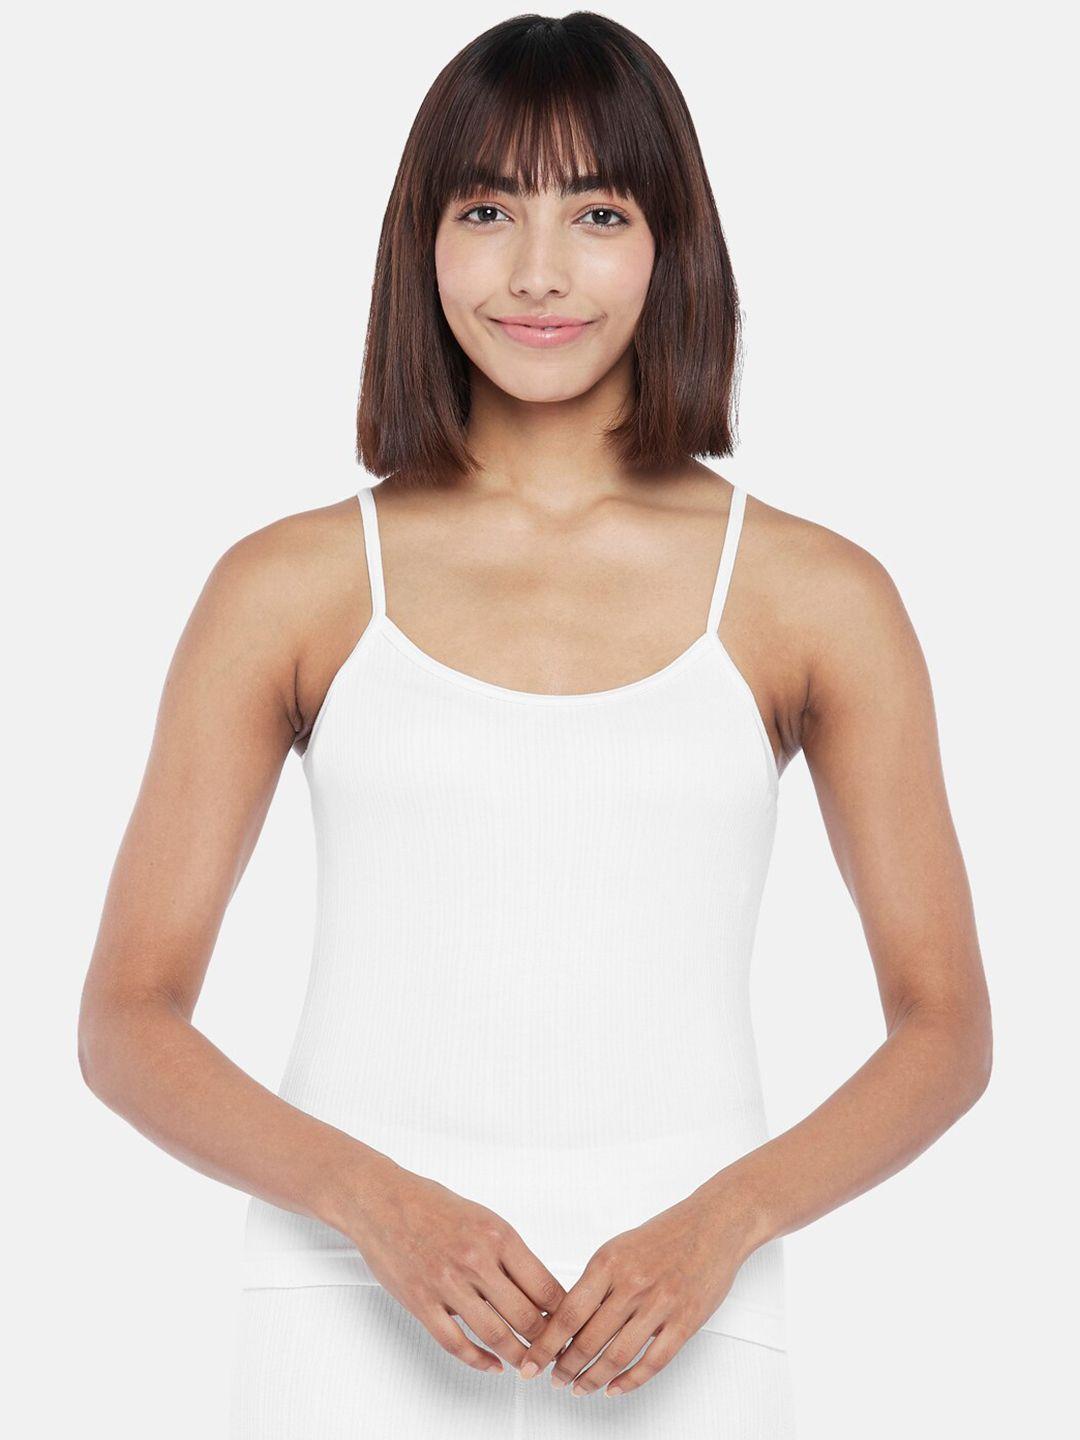 dreamz by pantaloons white self-striped camisole 8905500118311